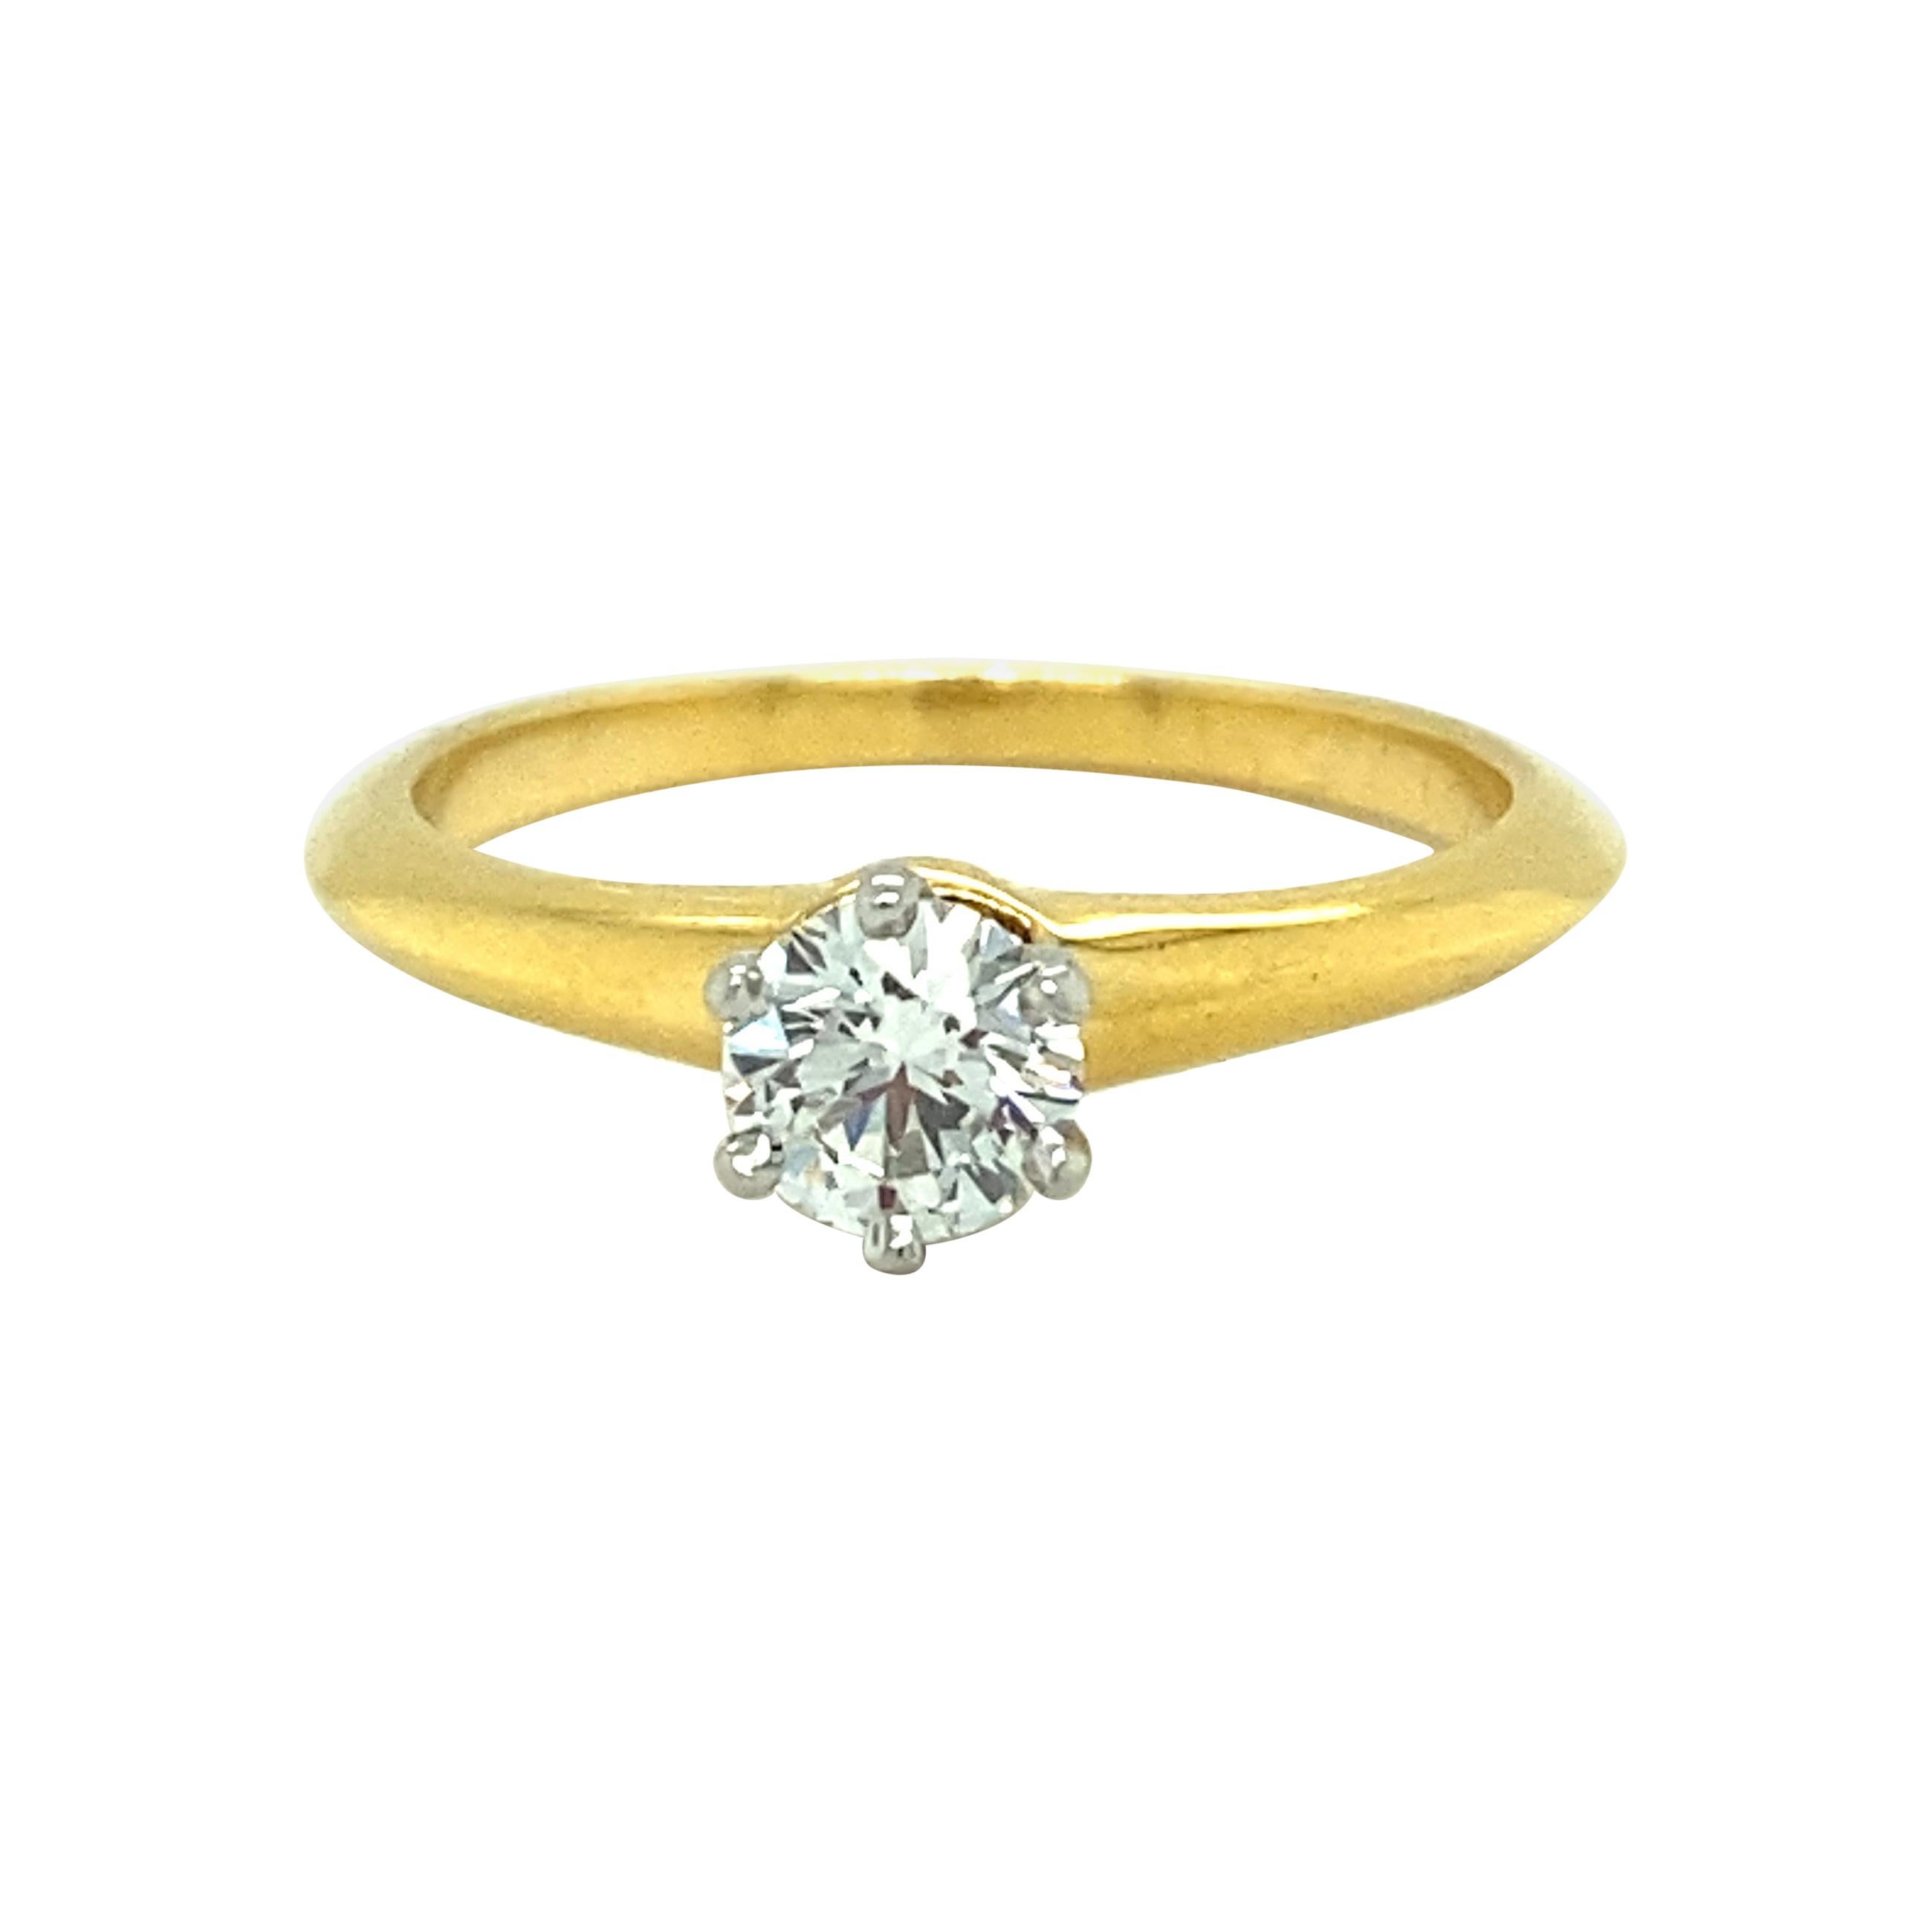 Size P 12 Vintage 18Ct Yellow Gold Solitaire Diamond Engagement Ring